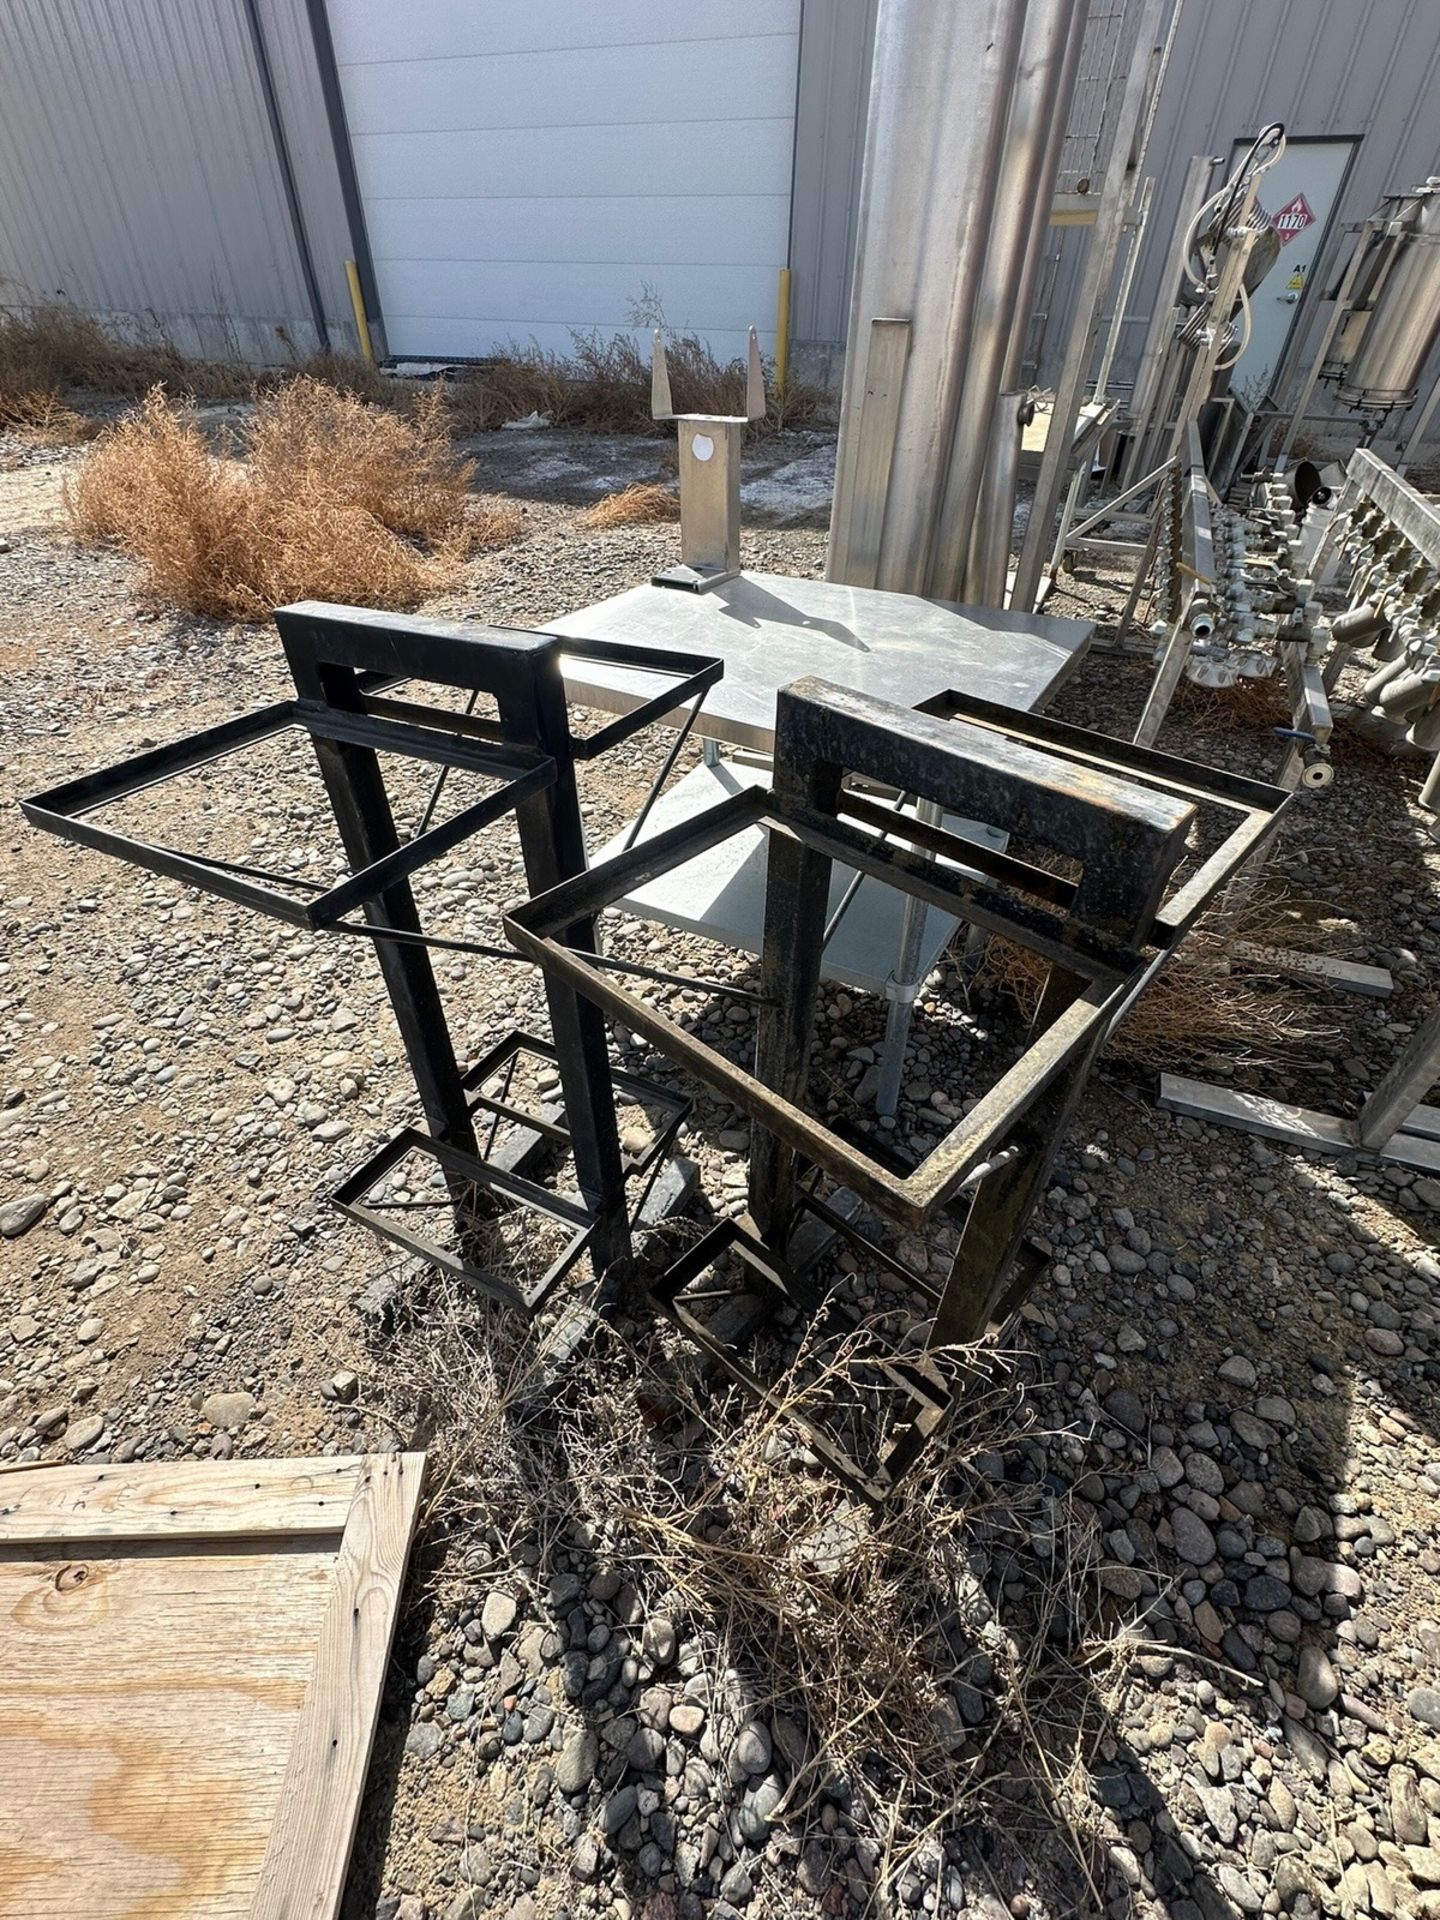 Lot Of Filers, Stainless Steel Tables, Parts | Rig Fee $350 - Image 2 of 16